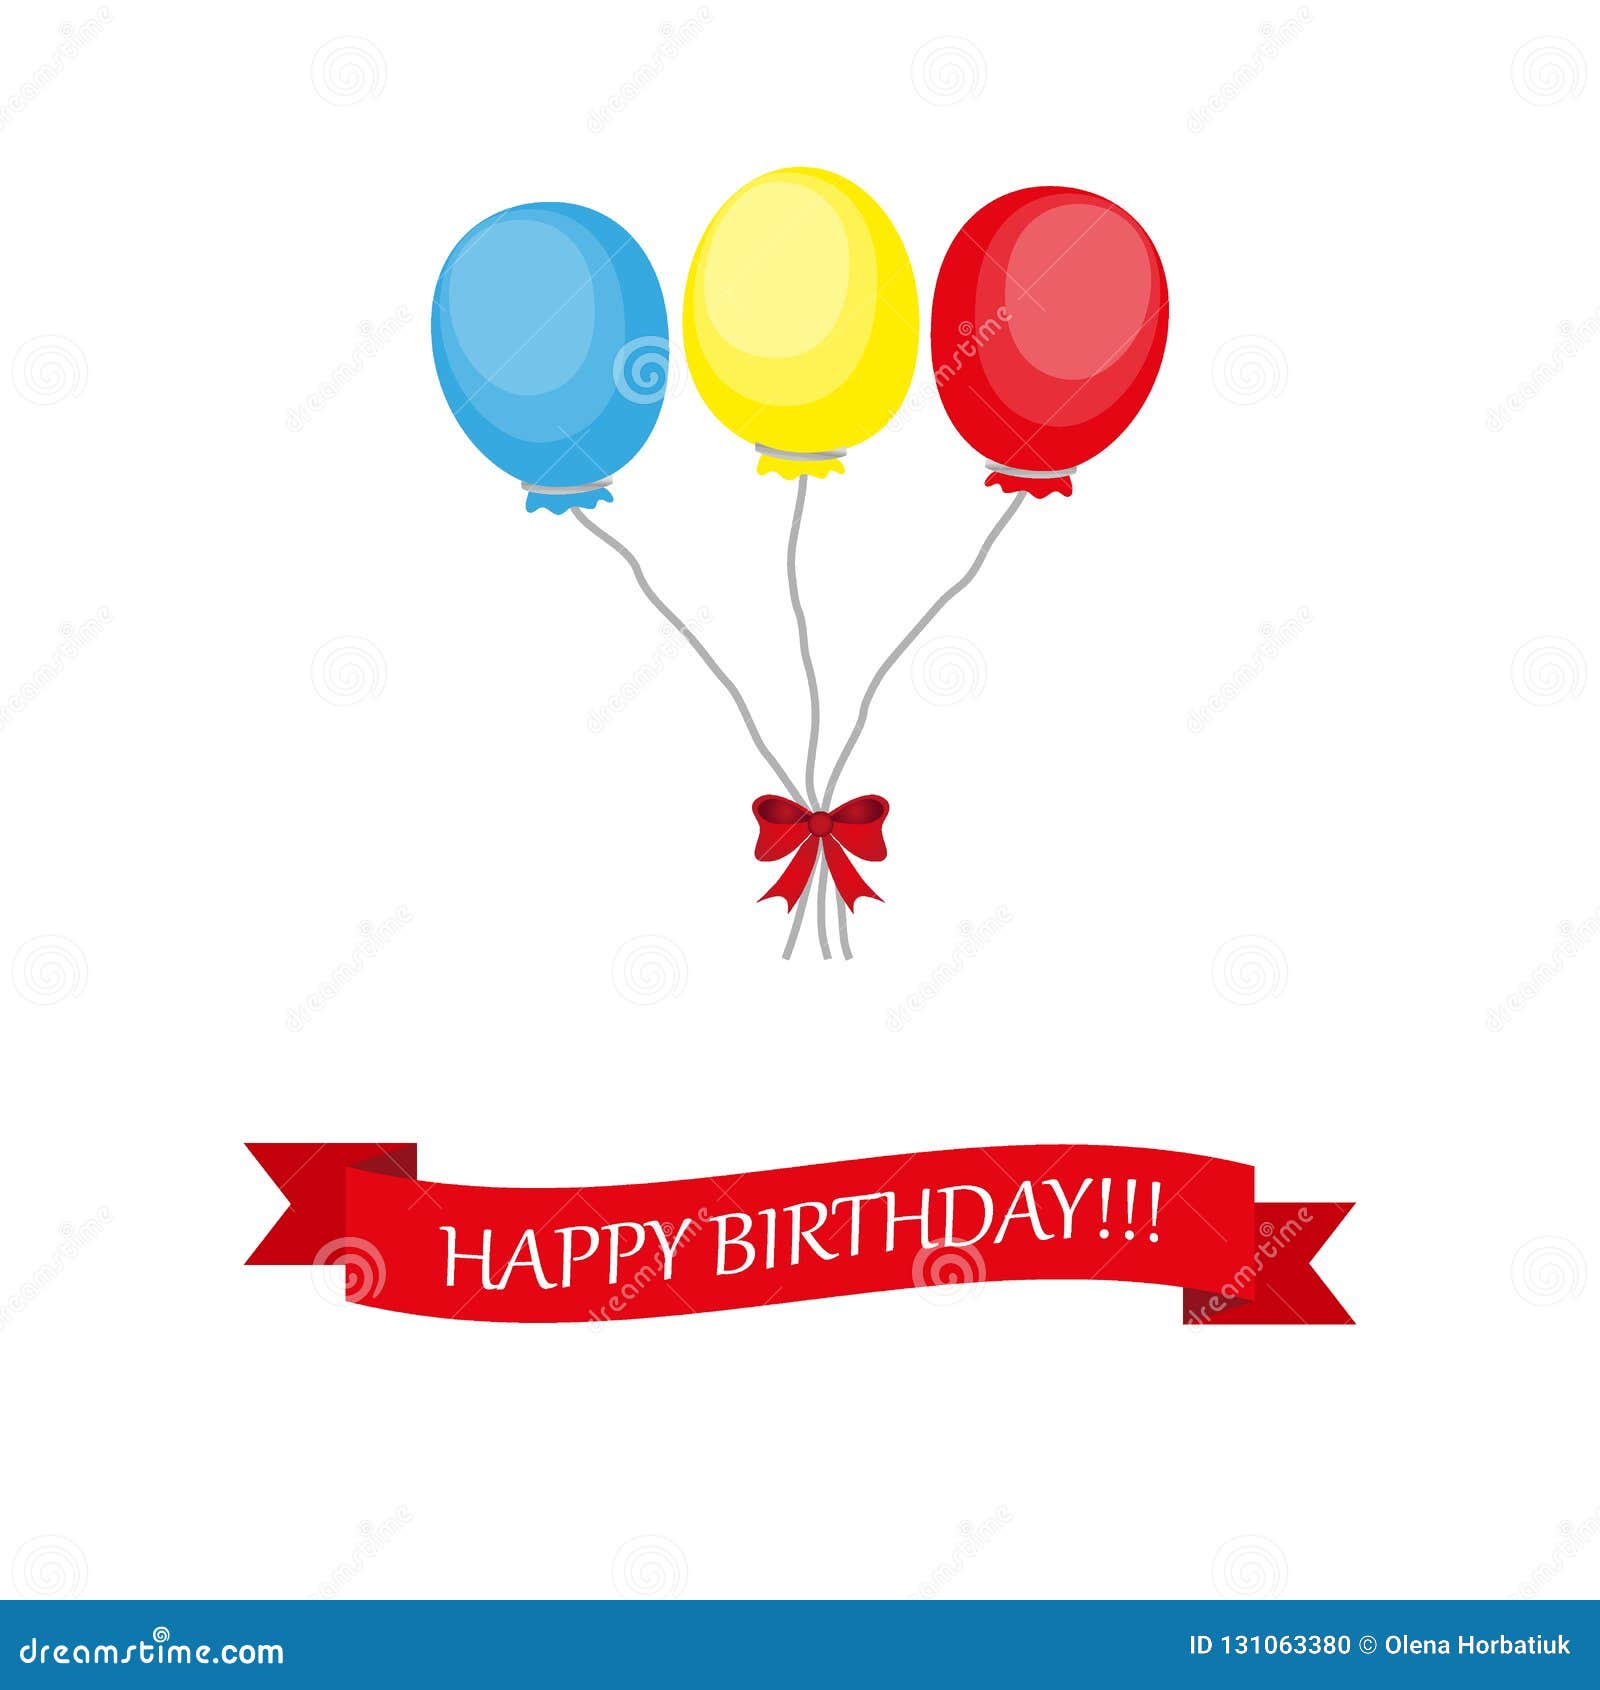 Download Holiday Background With Colorful Balloons And A Happy Birthday Ribbon. Vector. Stock Vector ...